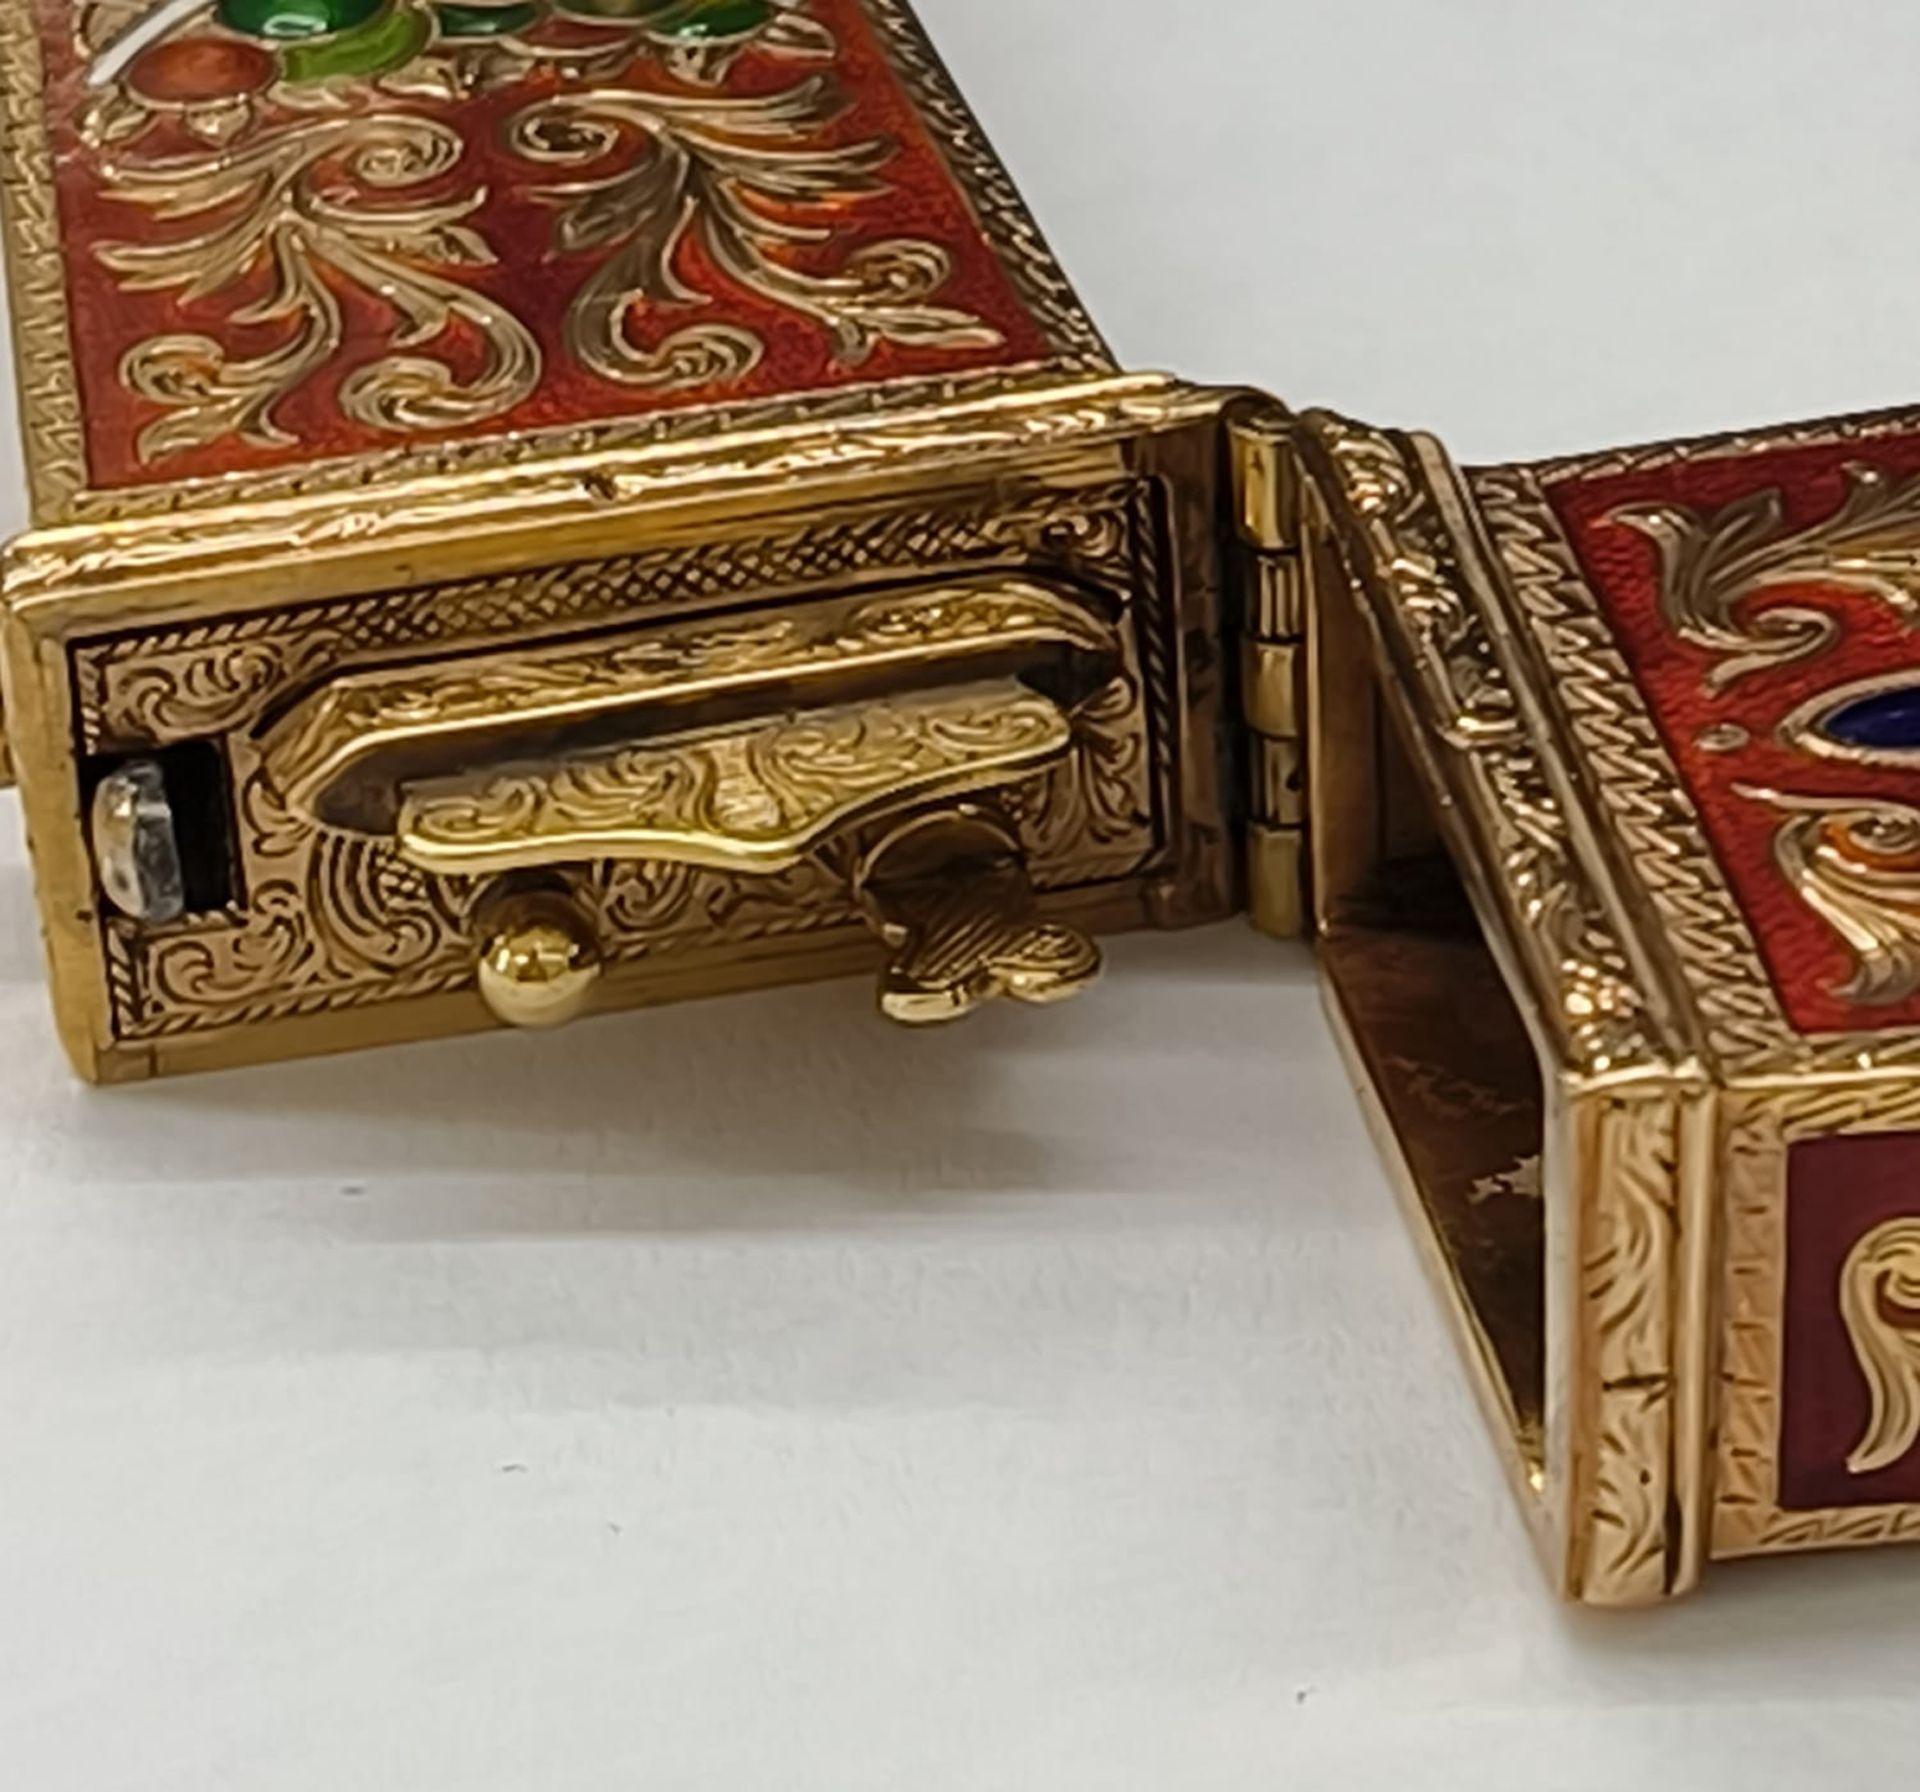 Etui in sterling gold and enamel set with rubies and old-cut diamond, Russian work from the early 20 - Bild 7 aus 8